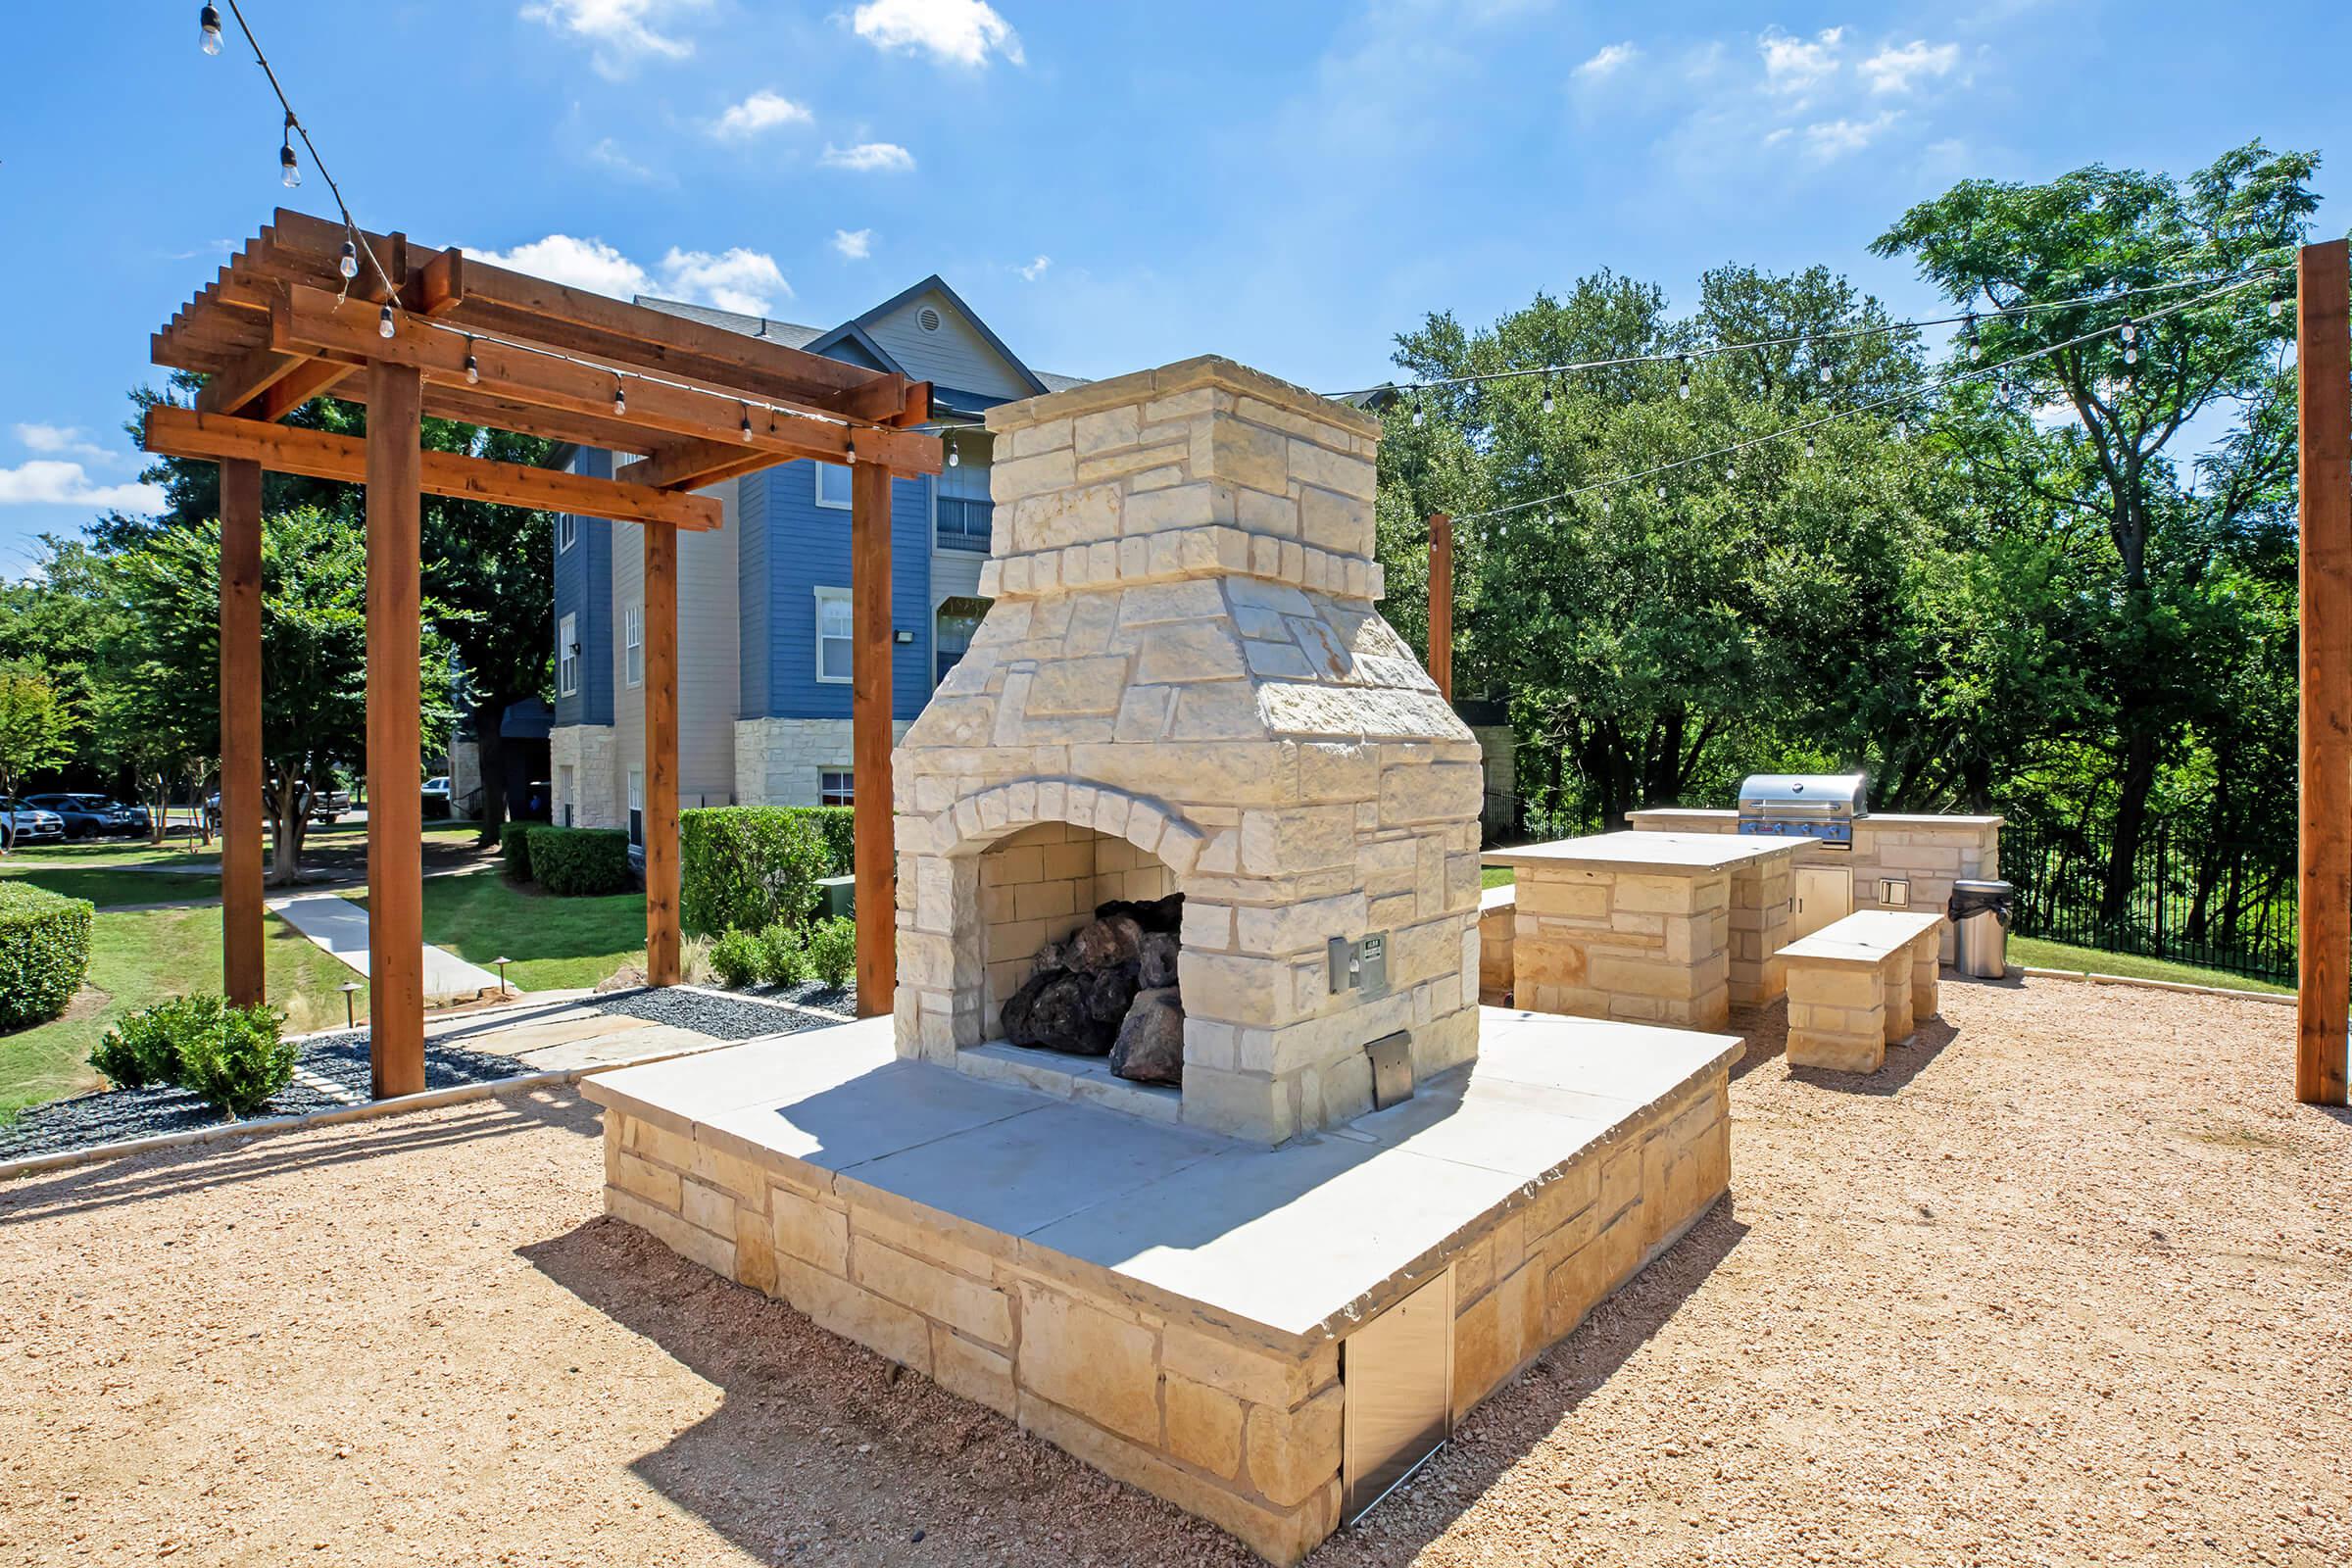 The Falls Round Rock Apartments outdoor fireplaces